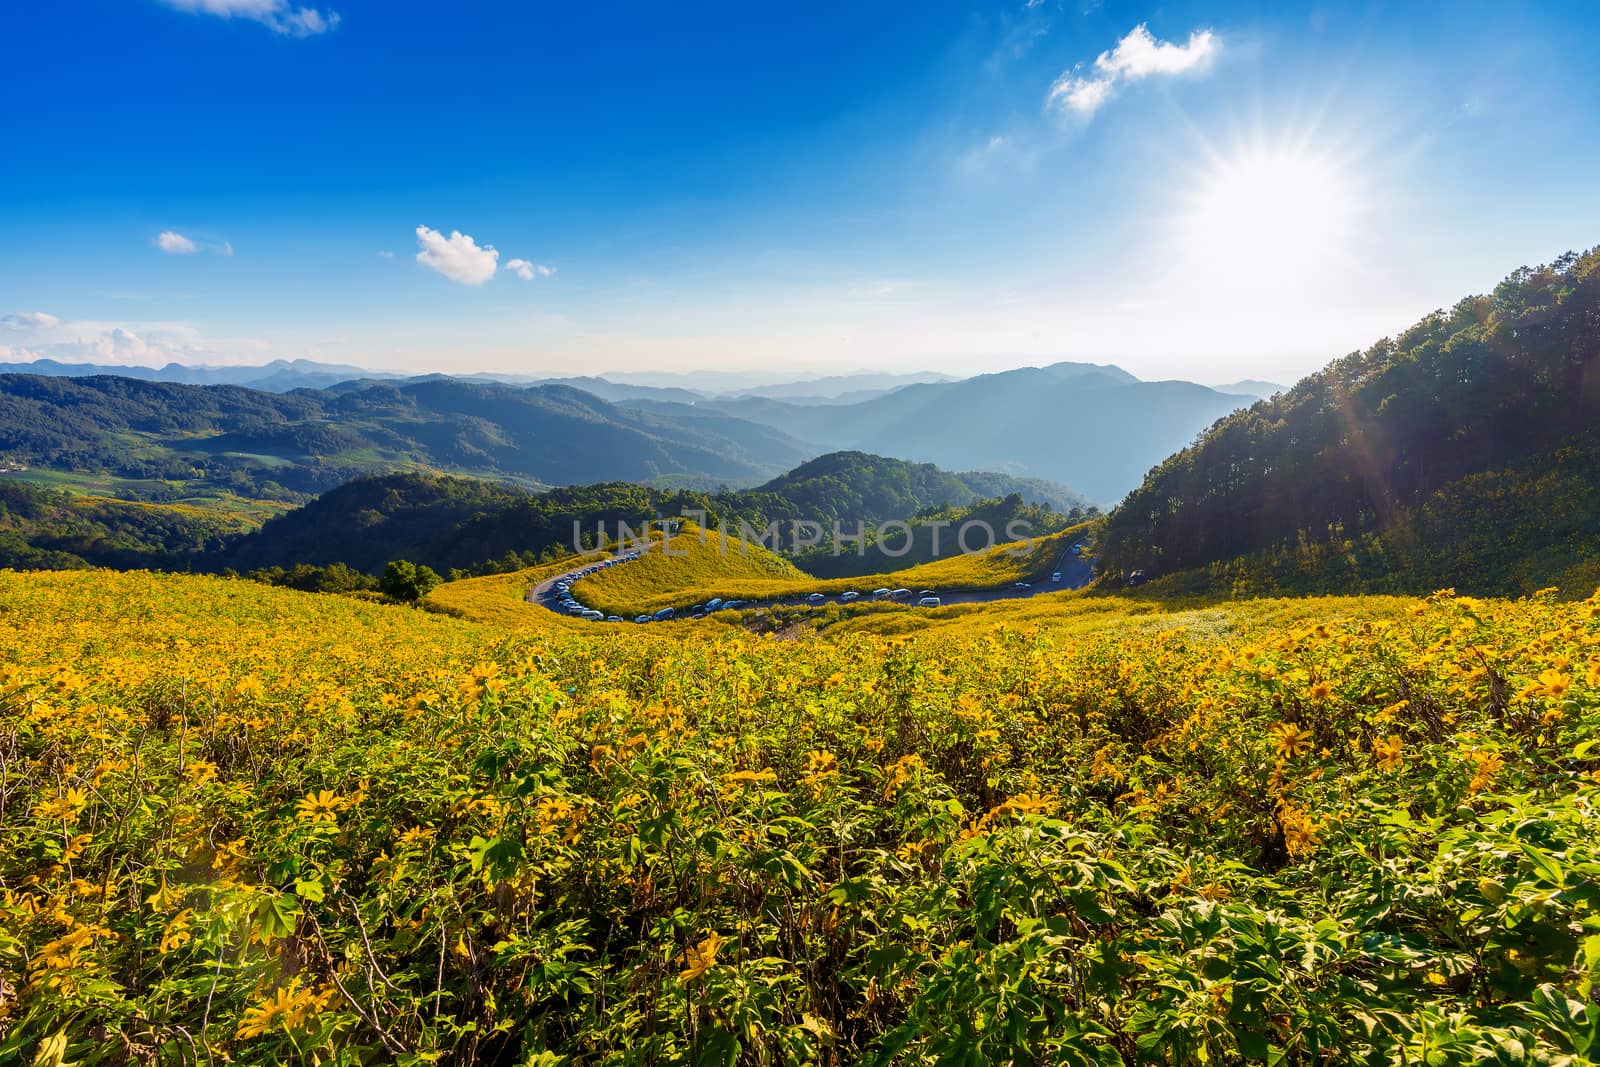 Tung Bua Tong Mexican sunflower field at Mae Hong Son Province in Thailand.